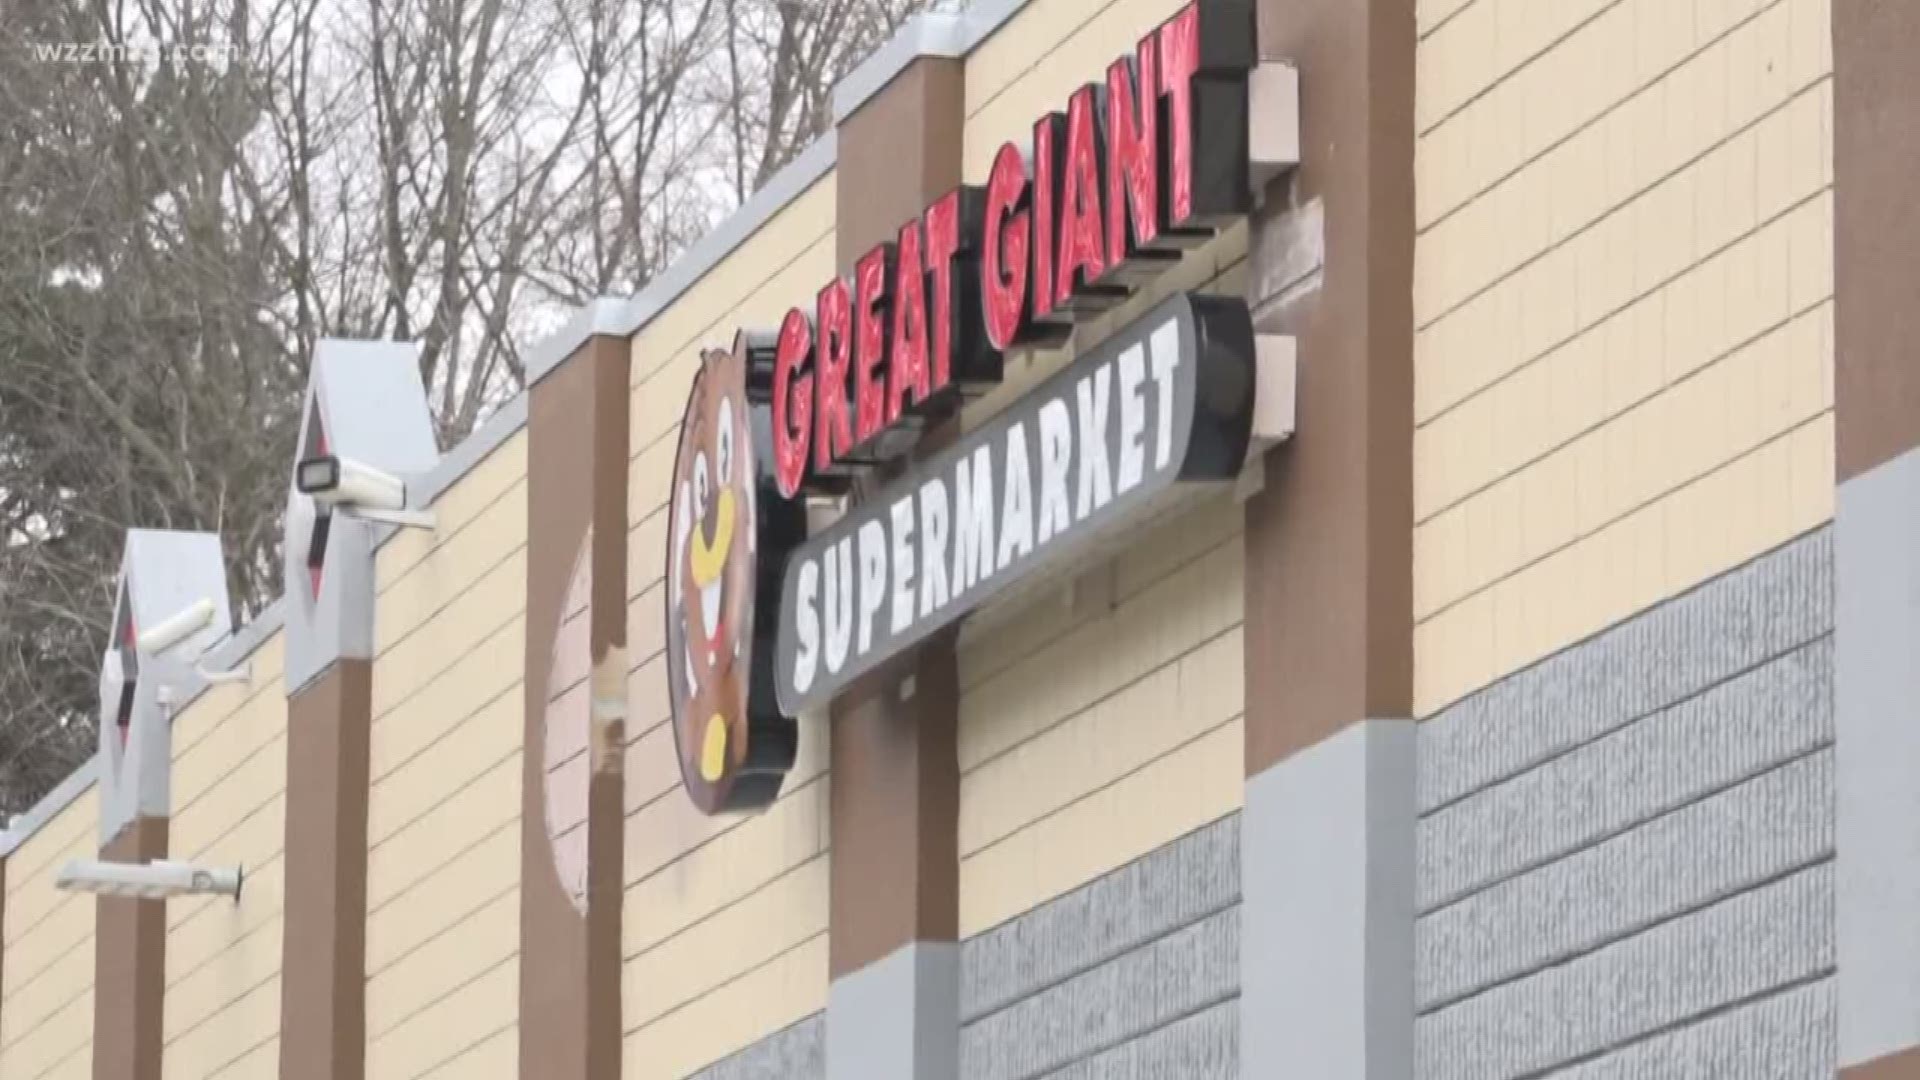 Great giant market reopens